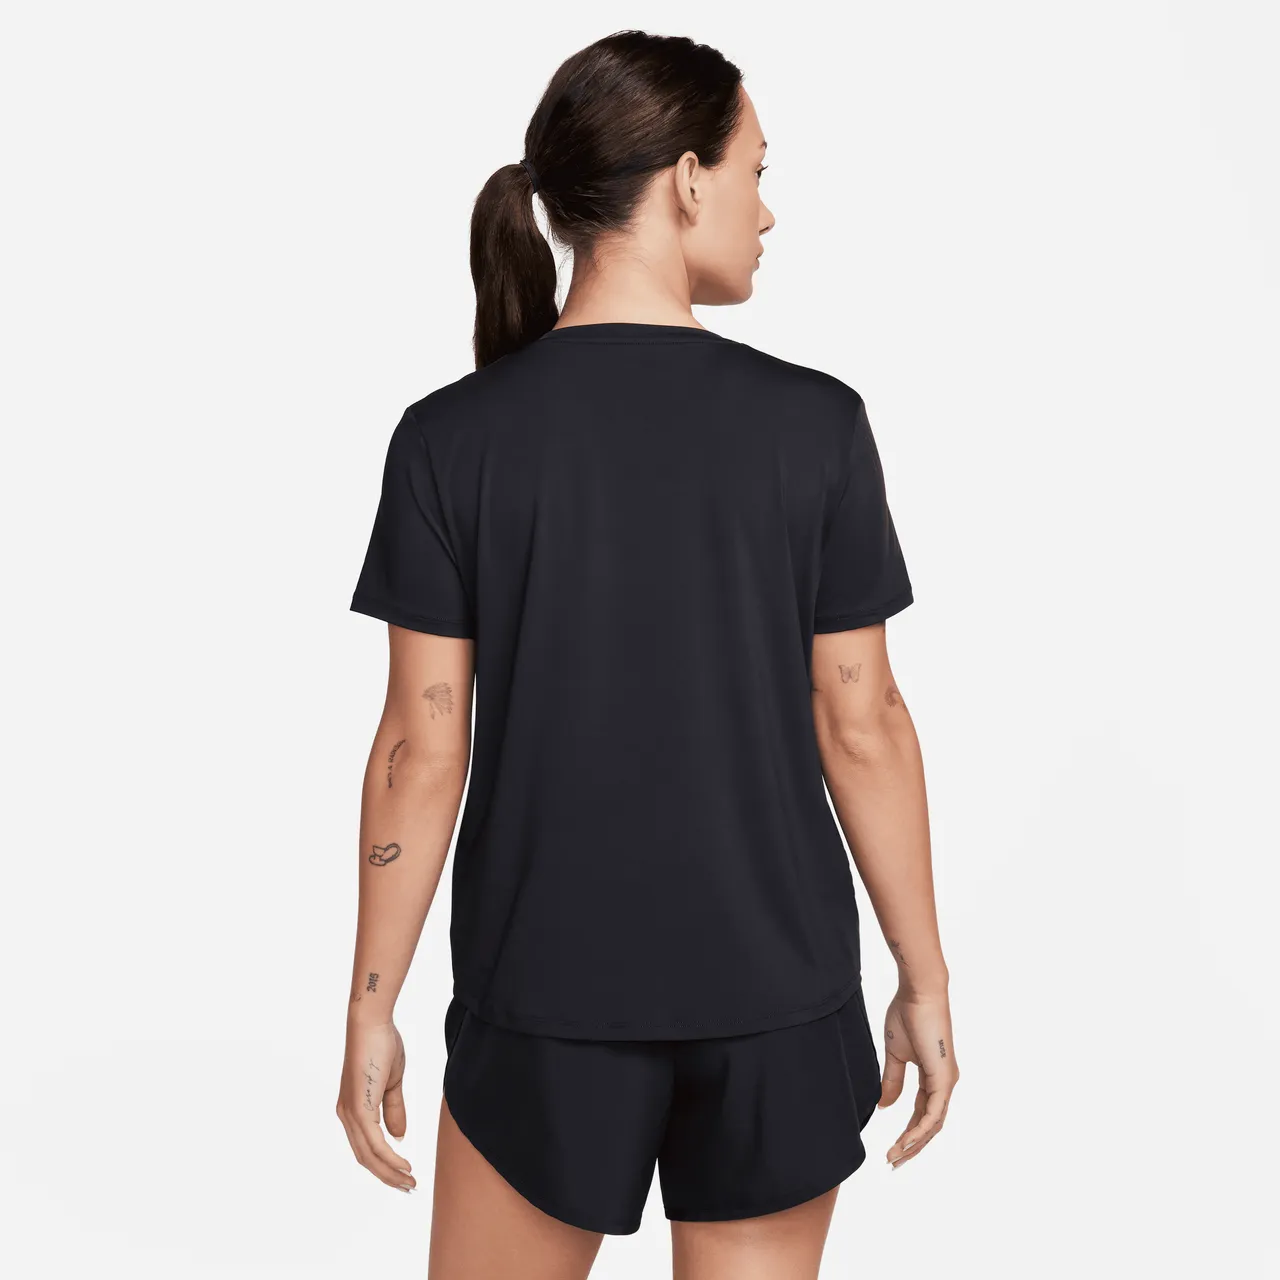 Nike One Classic Women's Dri-FIT Short-Sleeve Top - Black - Polyester